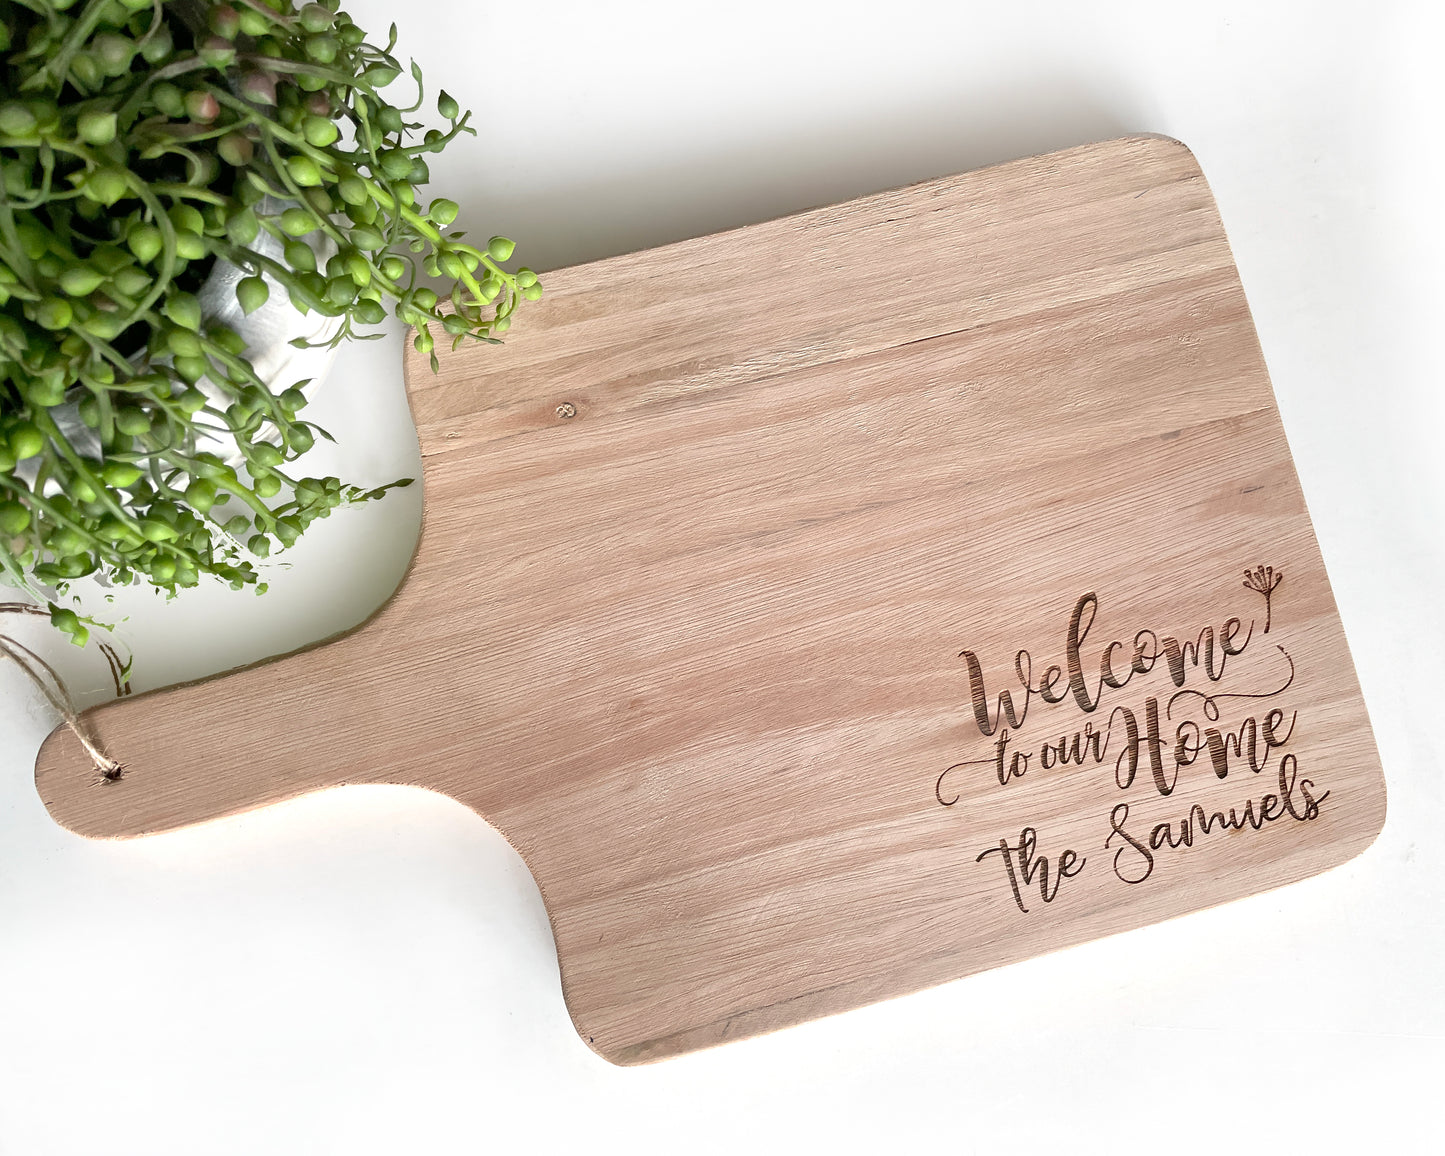 Personalized engraved cheese paddle board